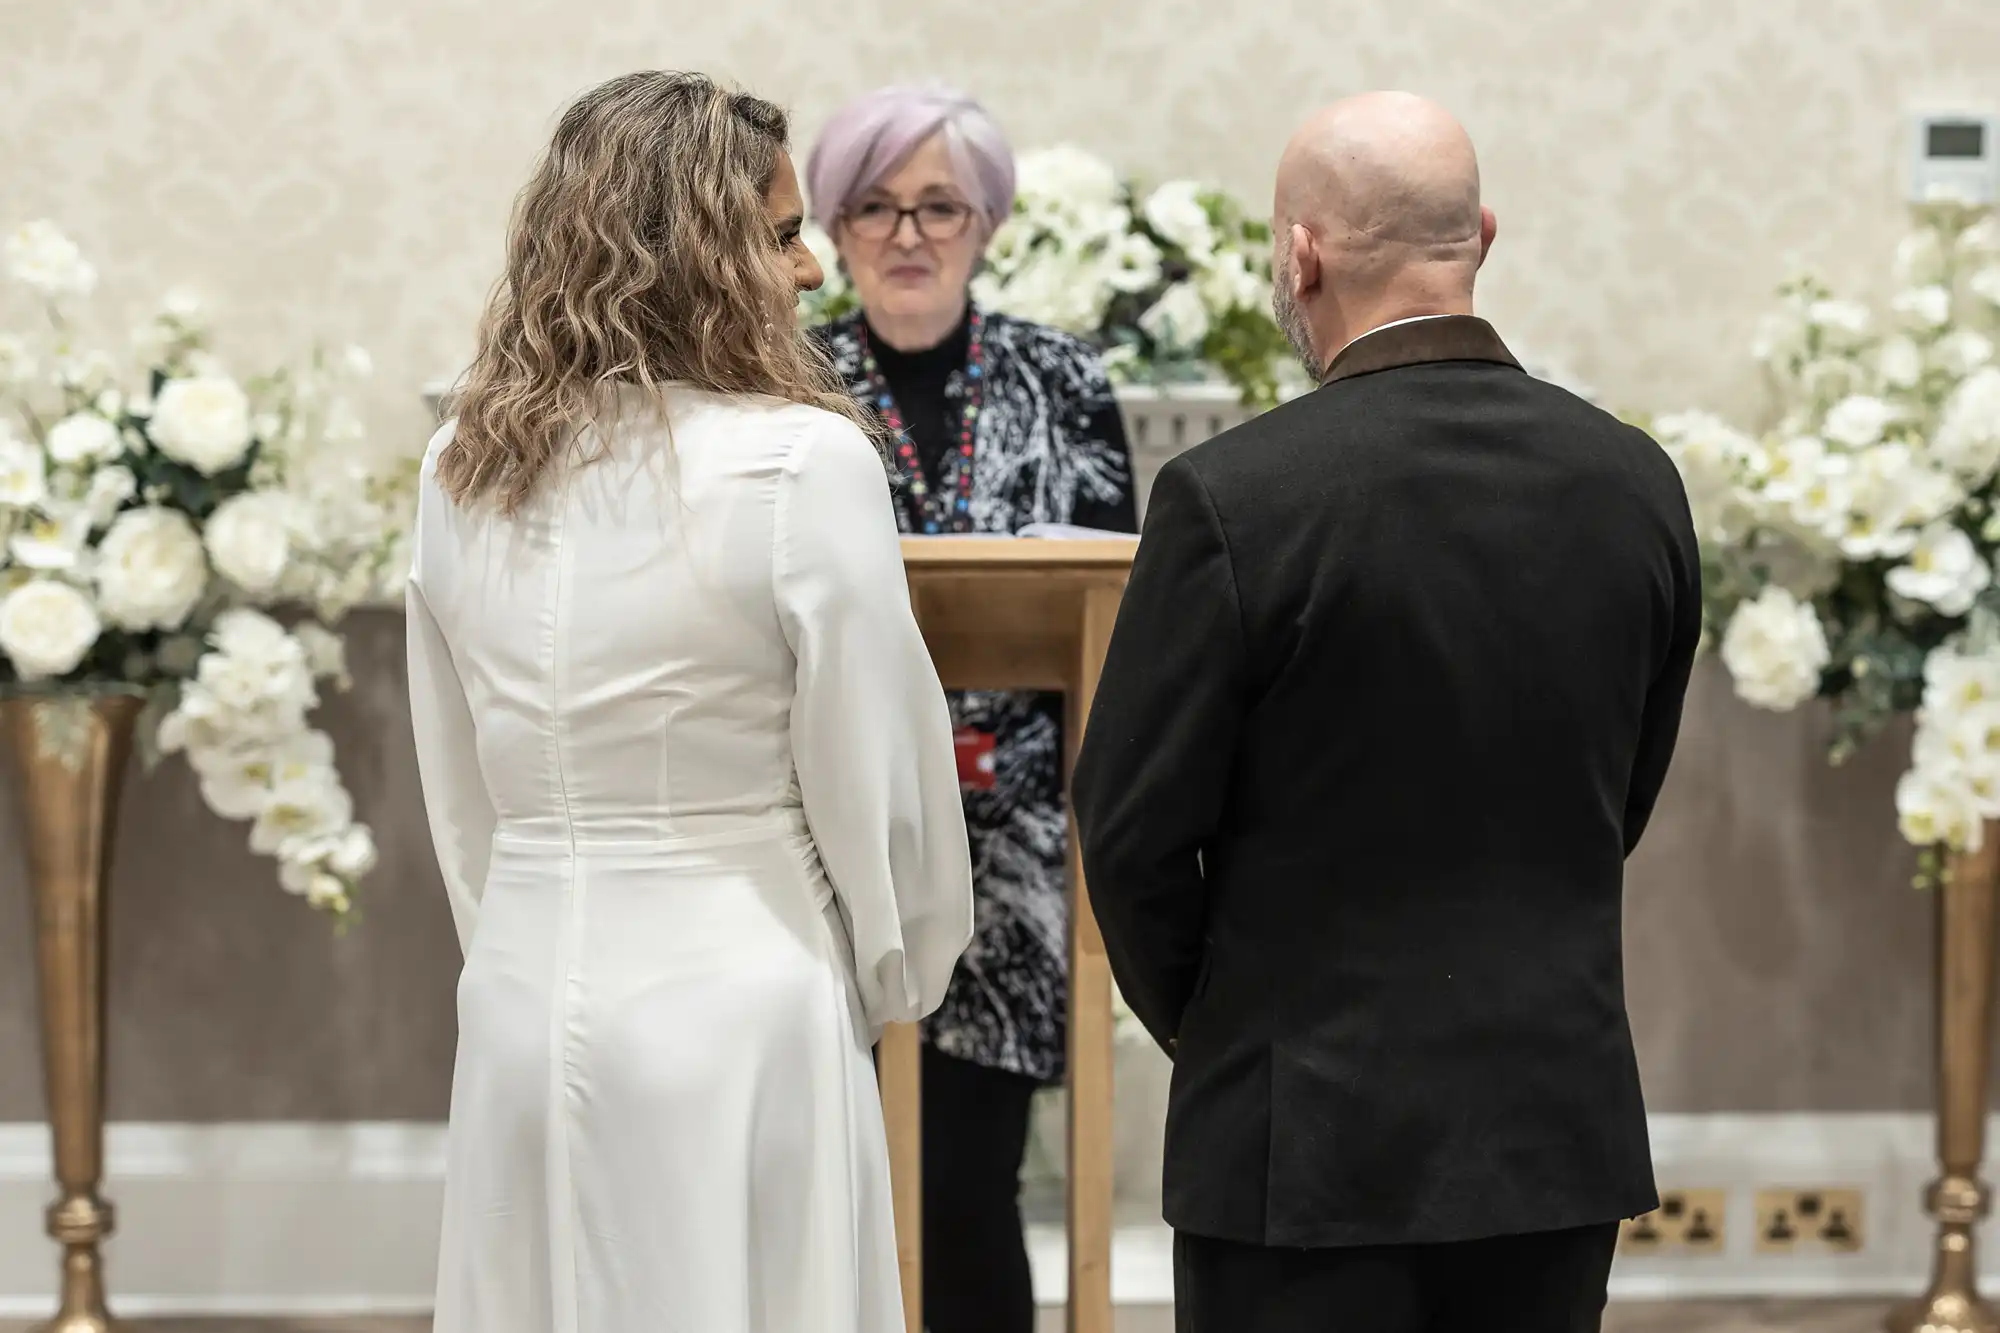 A couple stands in front of an officiant during a wedding ceremony. The officiant is positioned behind a podium, and floral arrangements are seen in the background.